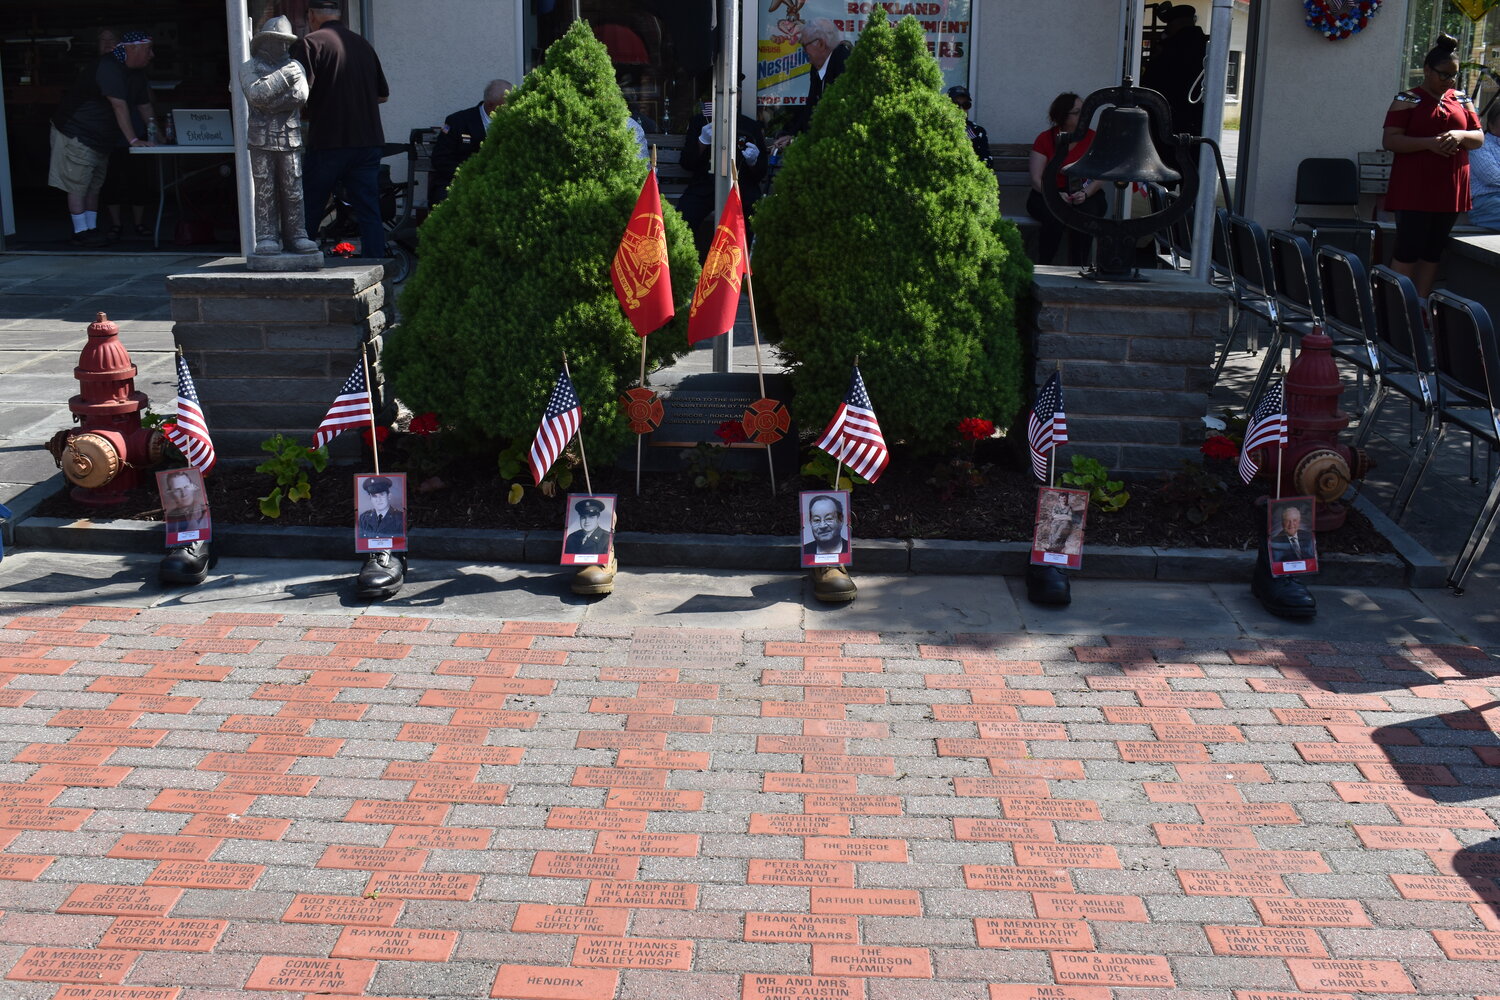 The Memorial Day committee set boots with flags and photos of deceased veterans along the parade route.